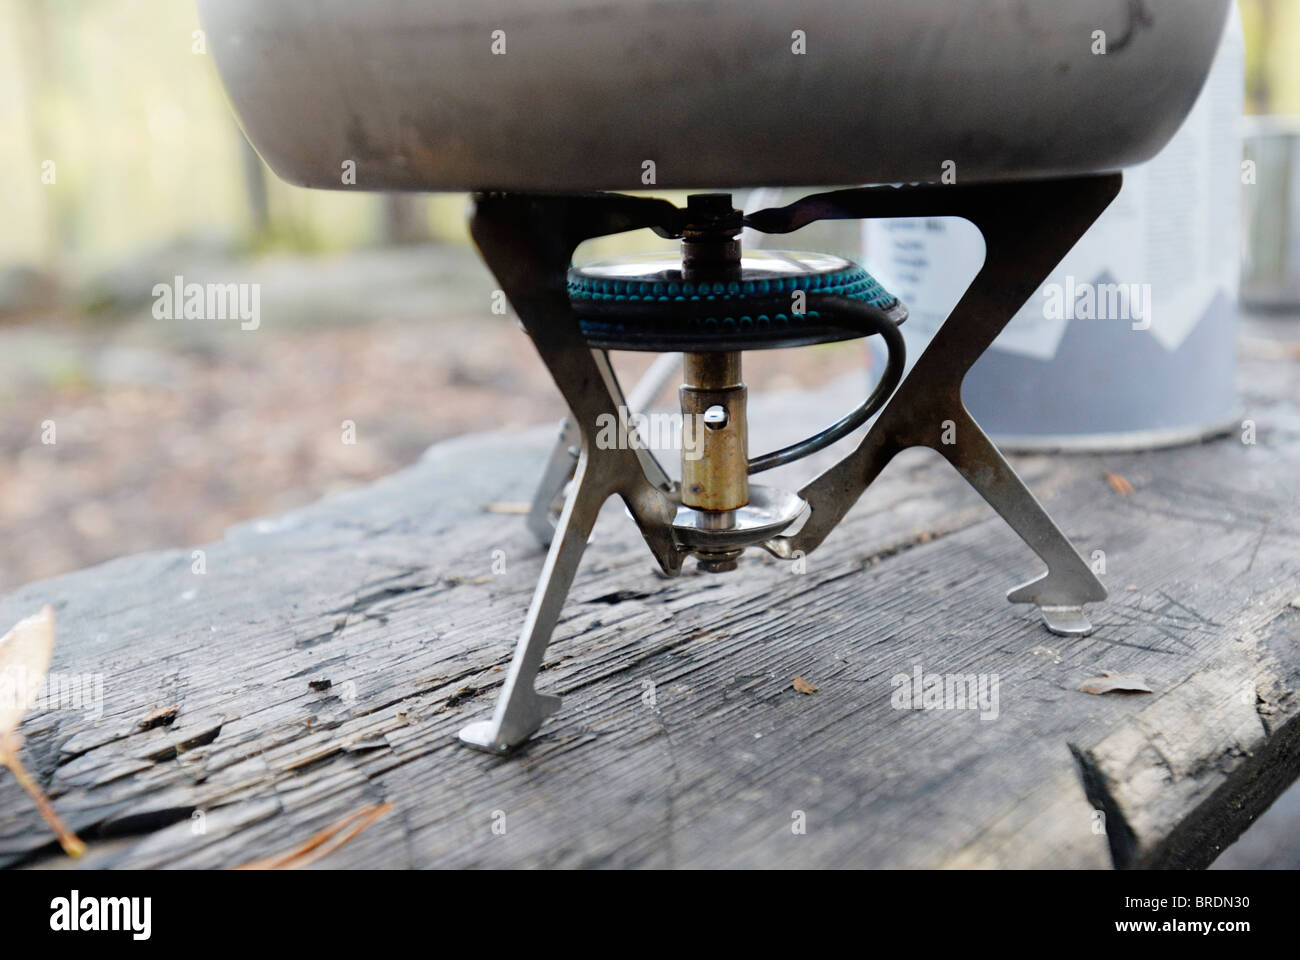 Cooking with portable gas stove, close-up Stock Photo